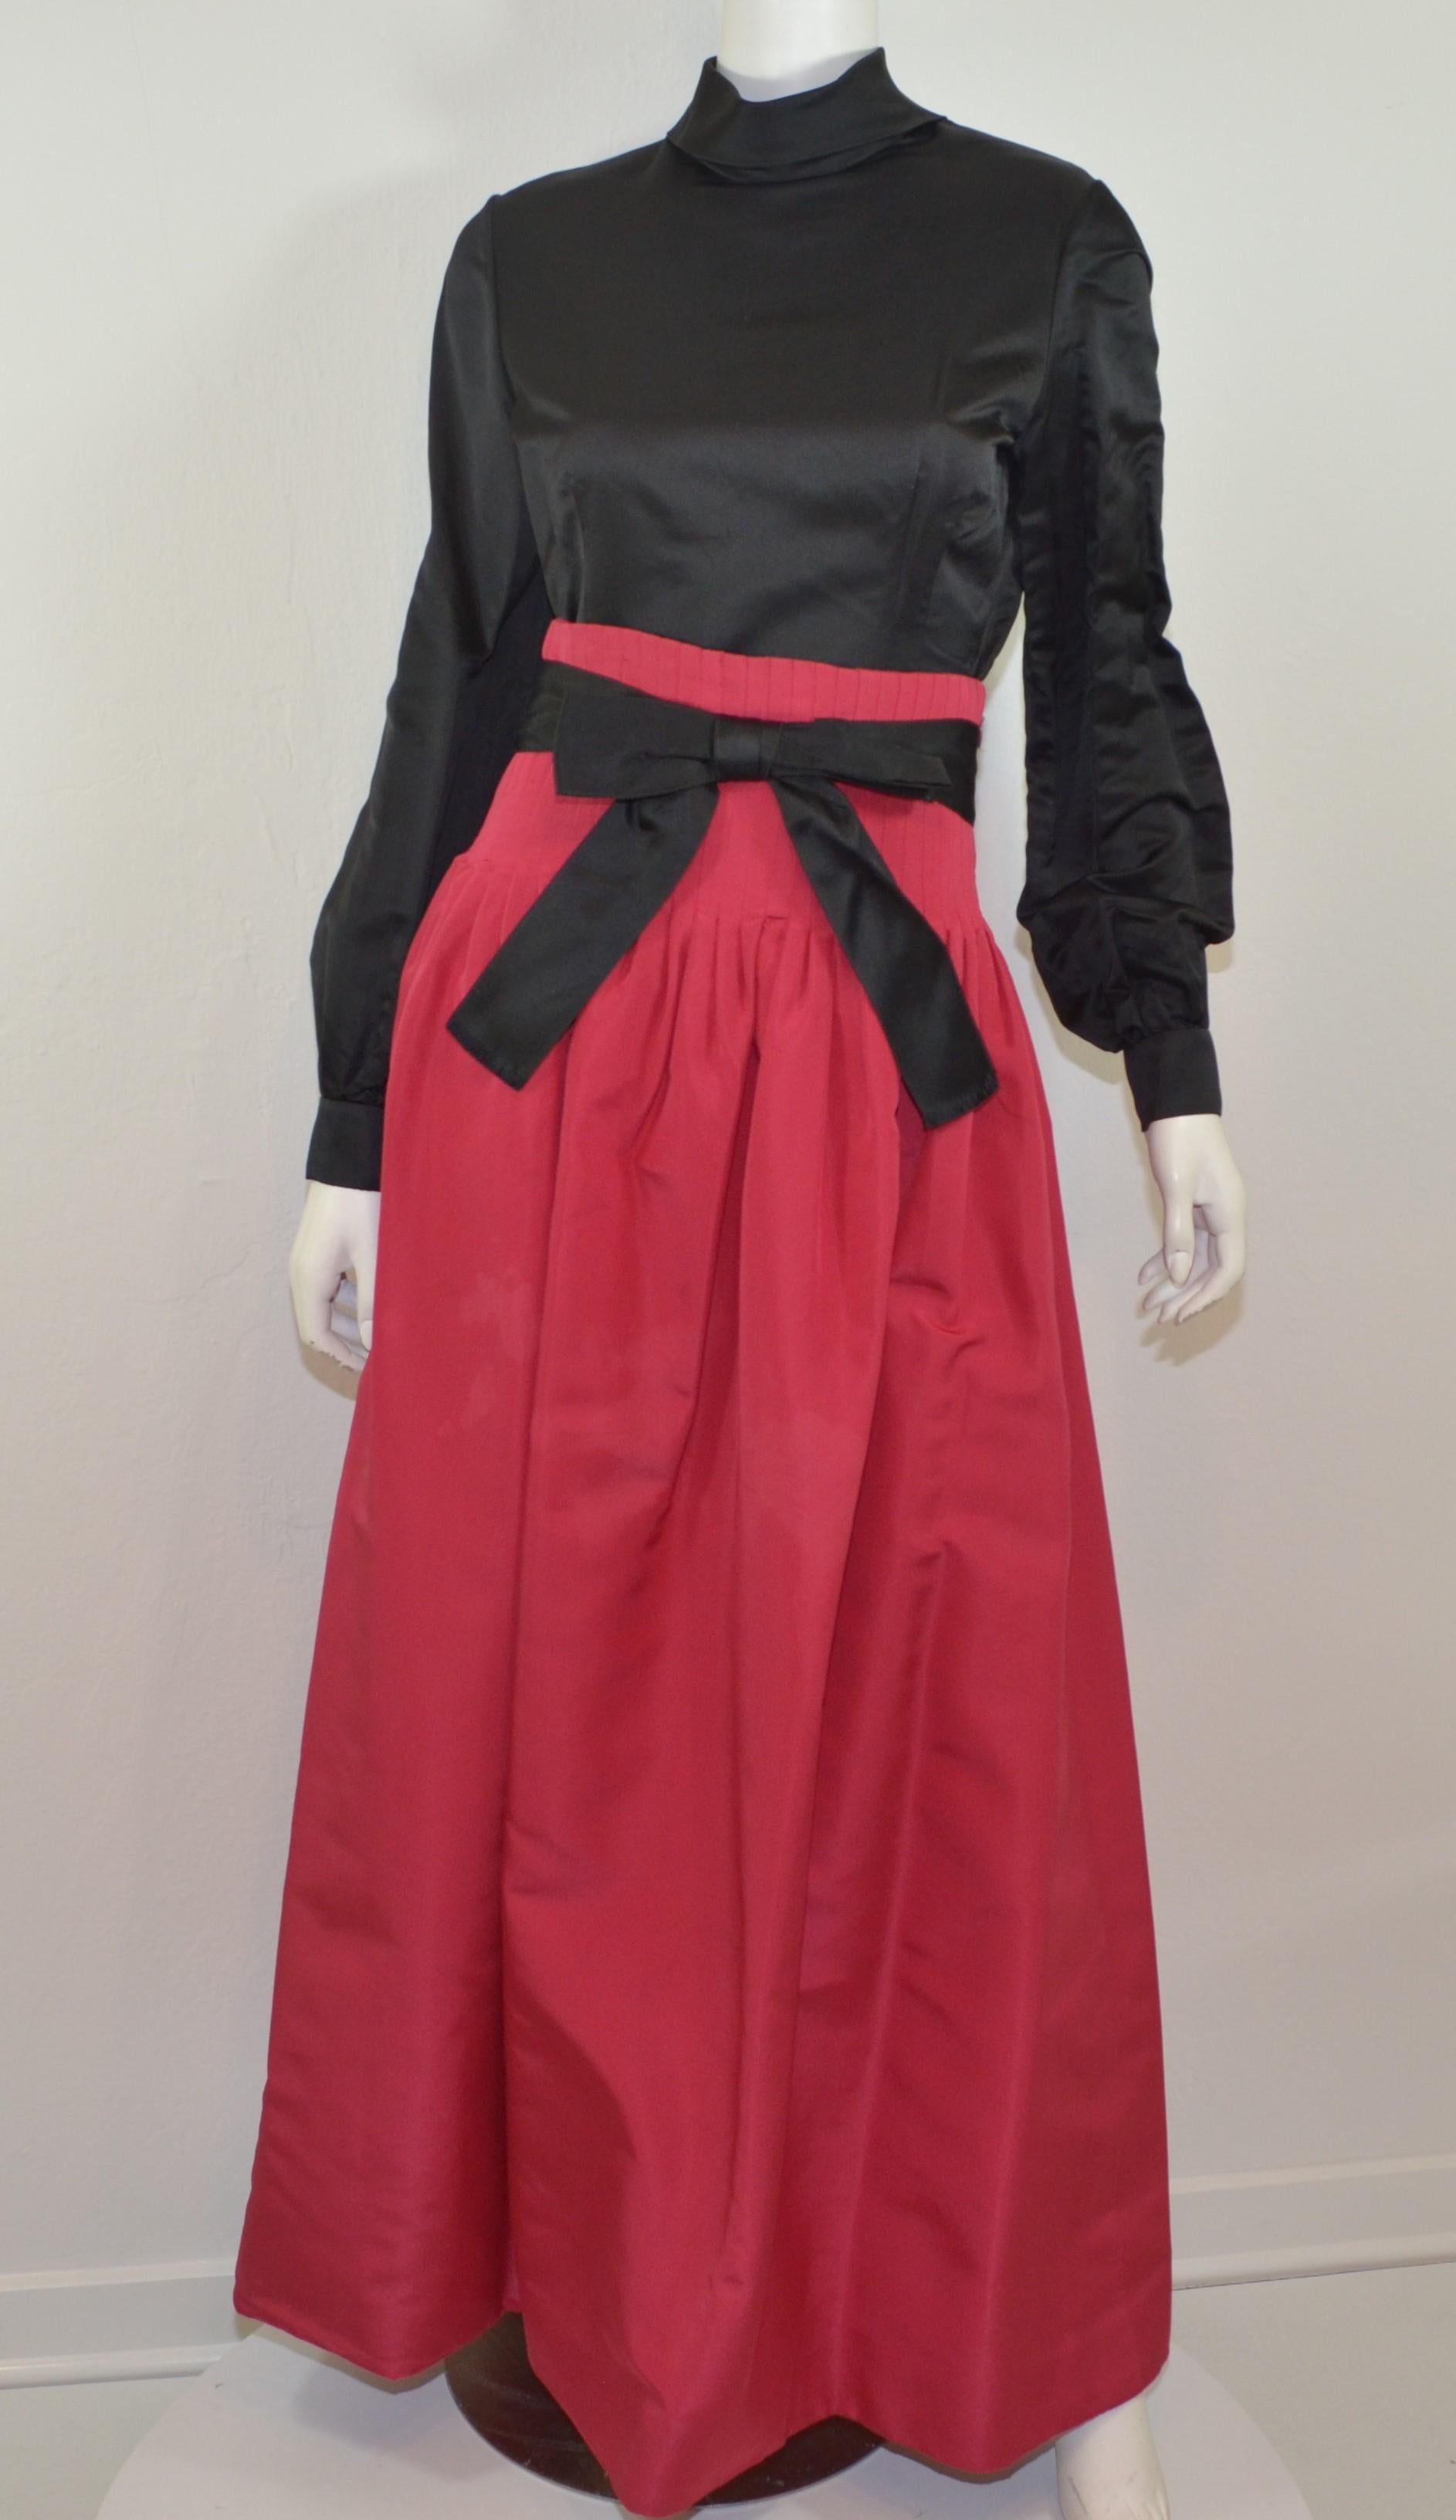 Pierre Cardin Mid-Century Modern full skirt and top ensemble. Skirt is a fuchsia color with a pintucked waistline, side zipper fastening and a black satin bow belt with snap and hook closures. Black satin top has a mock neck design, snap buttons at